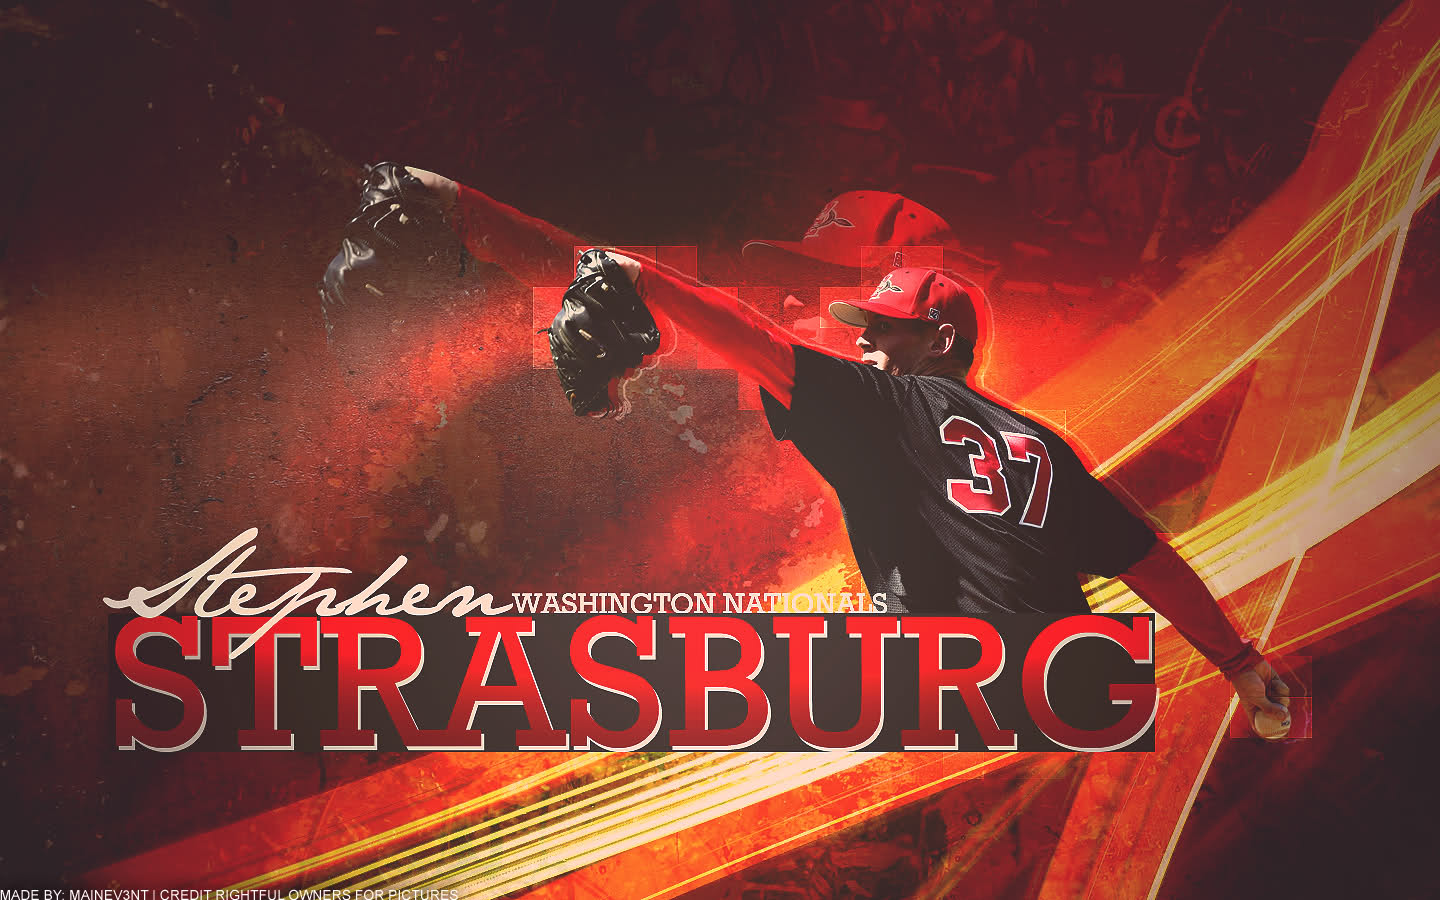 Stephen Strasburg By Mainev3nt From Wnff X